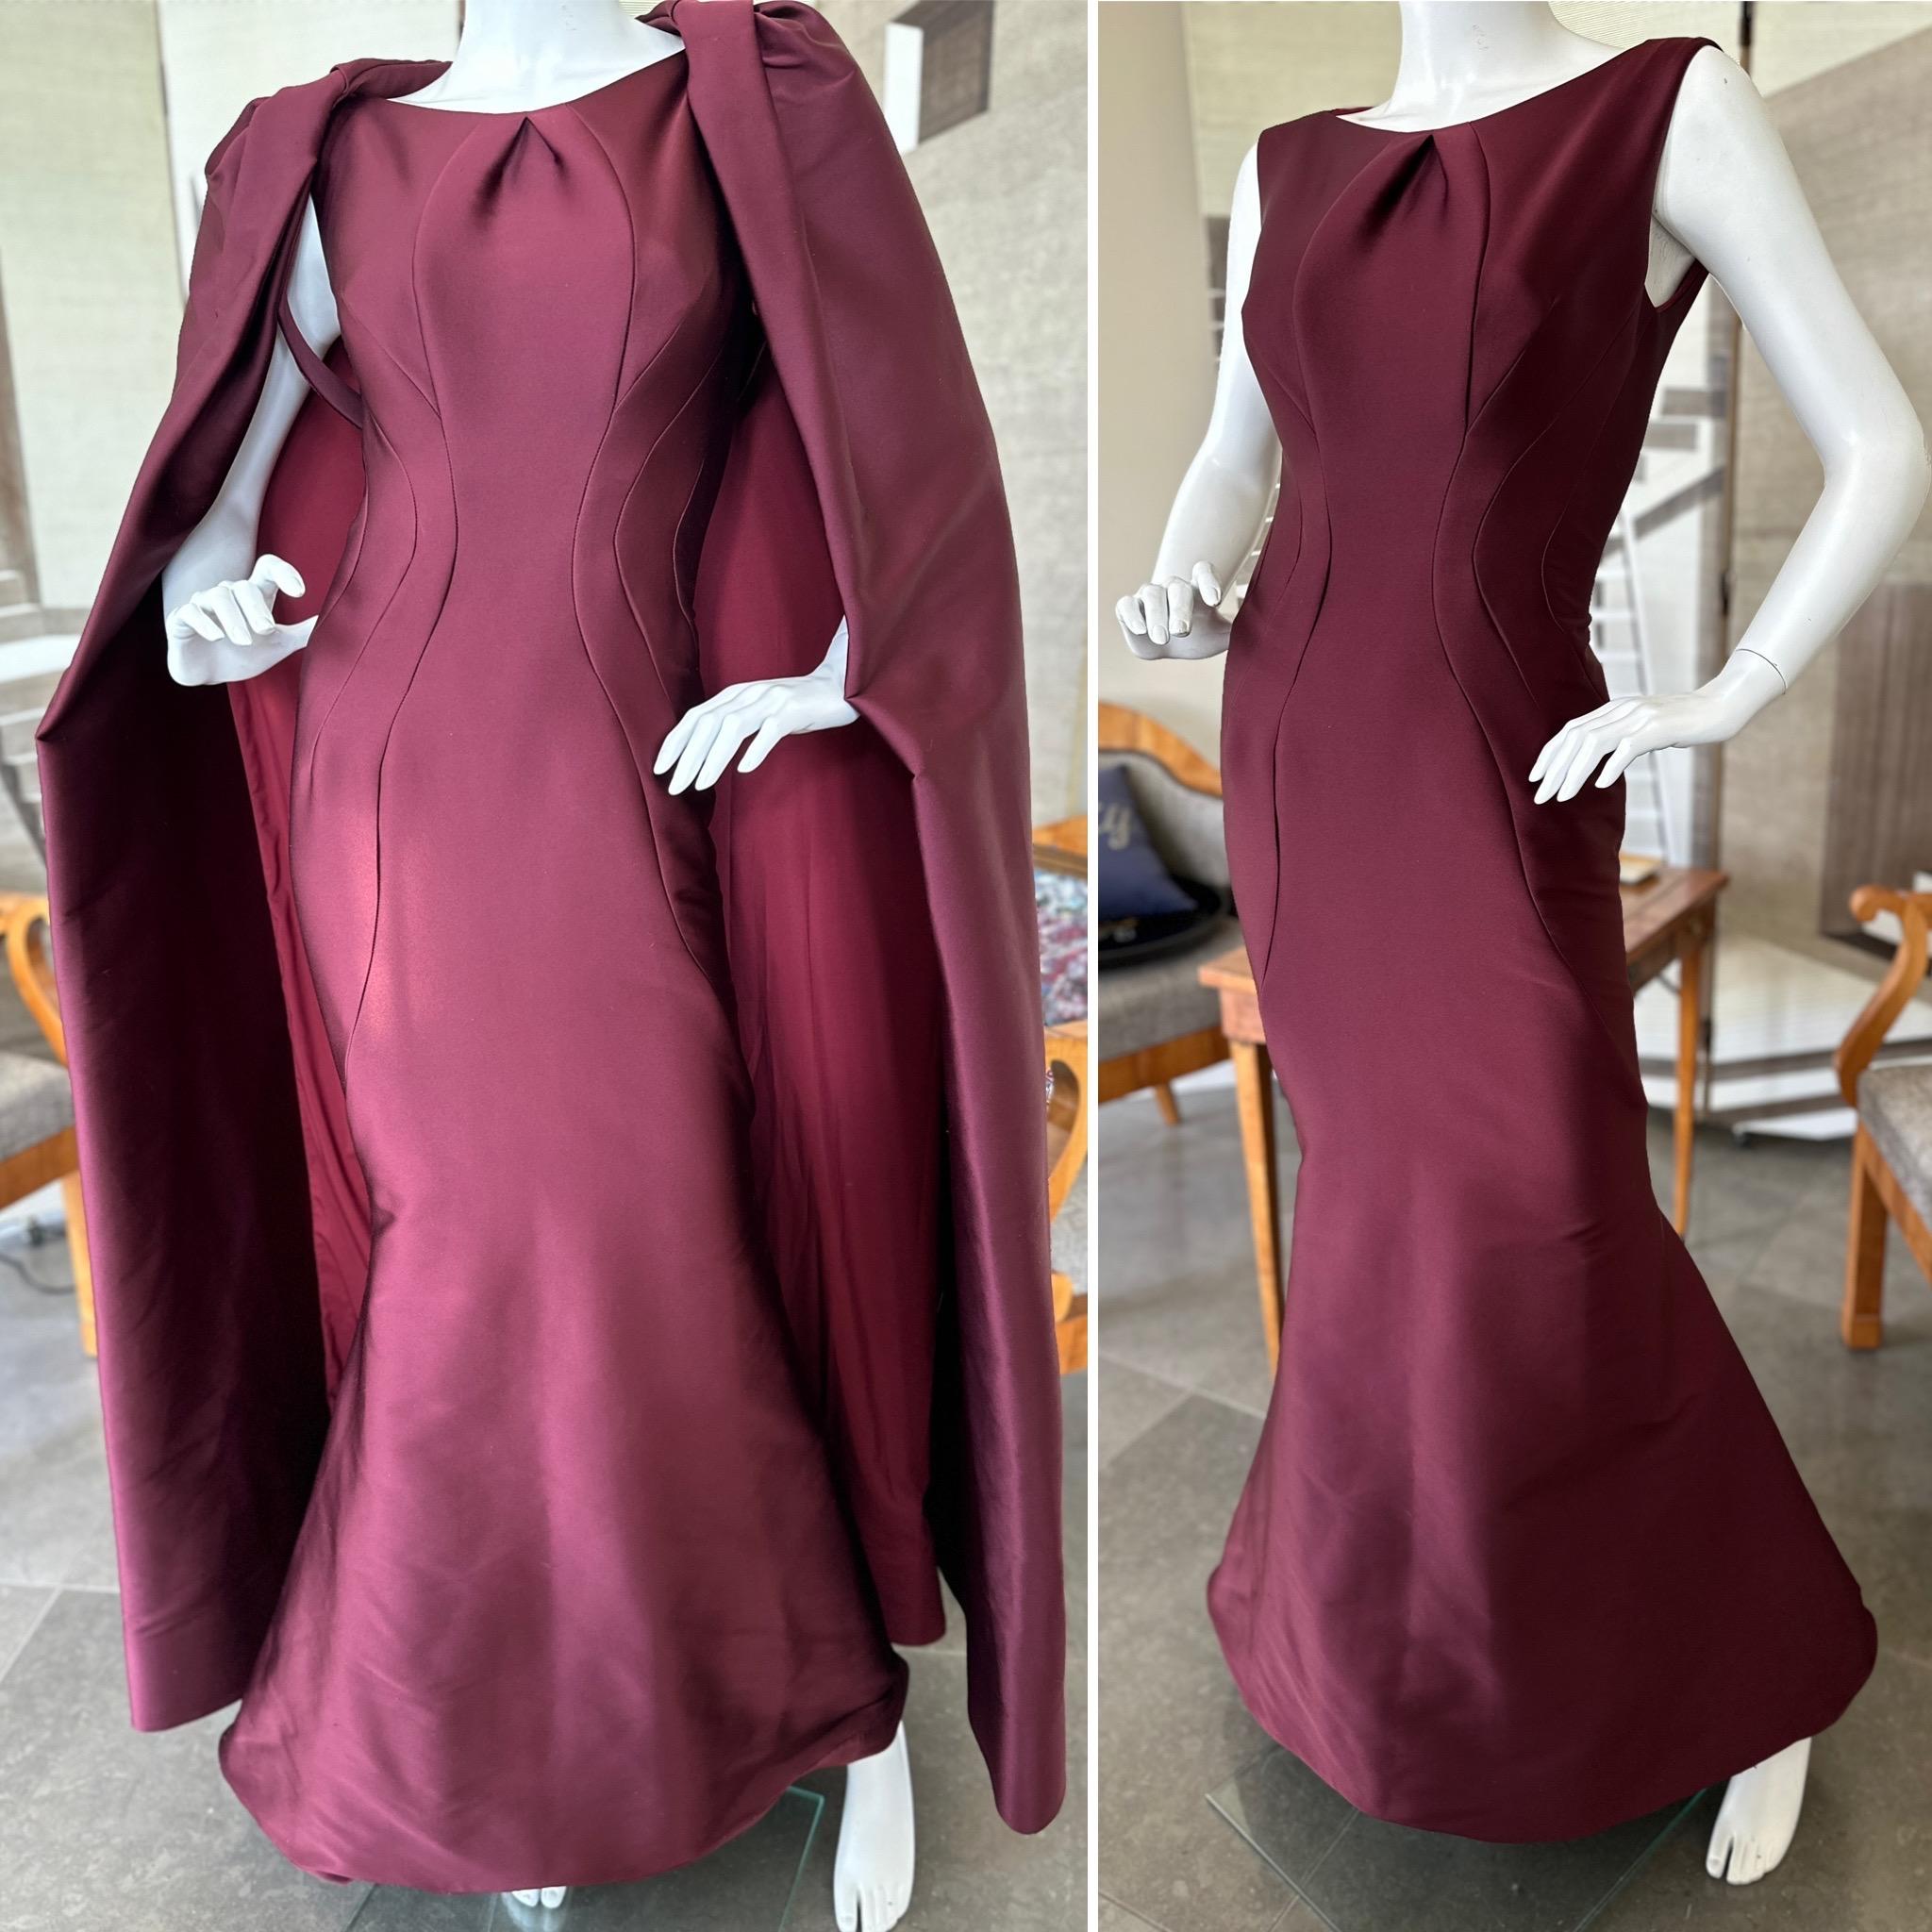 Zac Posen Vintage Fishtail Mermaid Evening Dress with Matching Cape In Good Condition For Sale In Cloverdale, CA